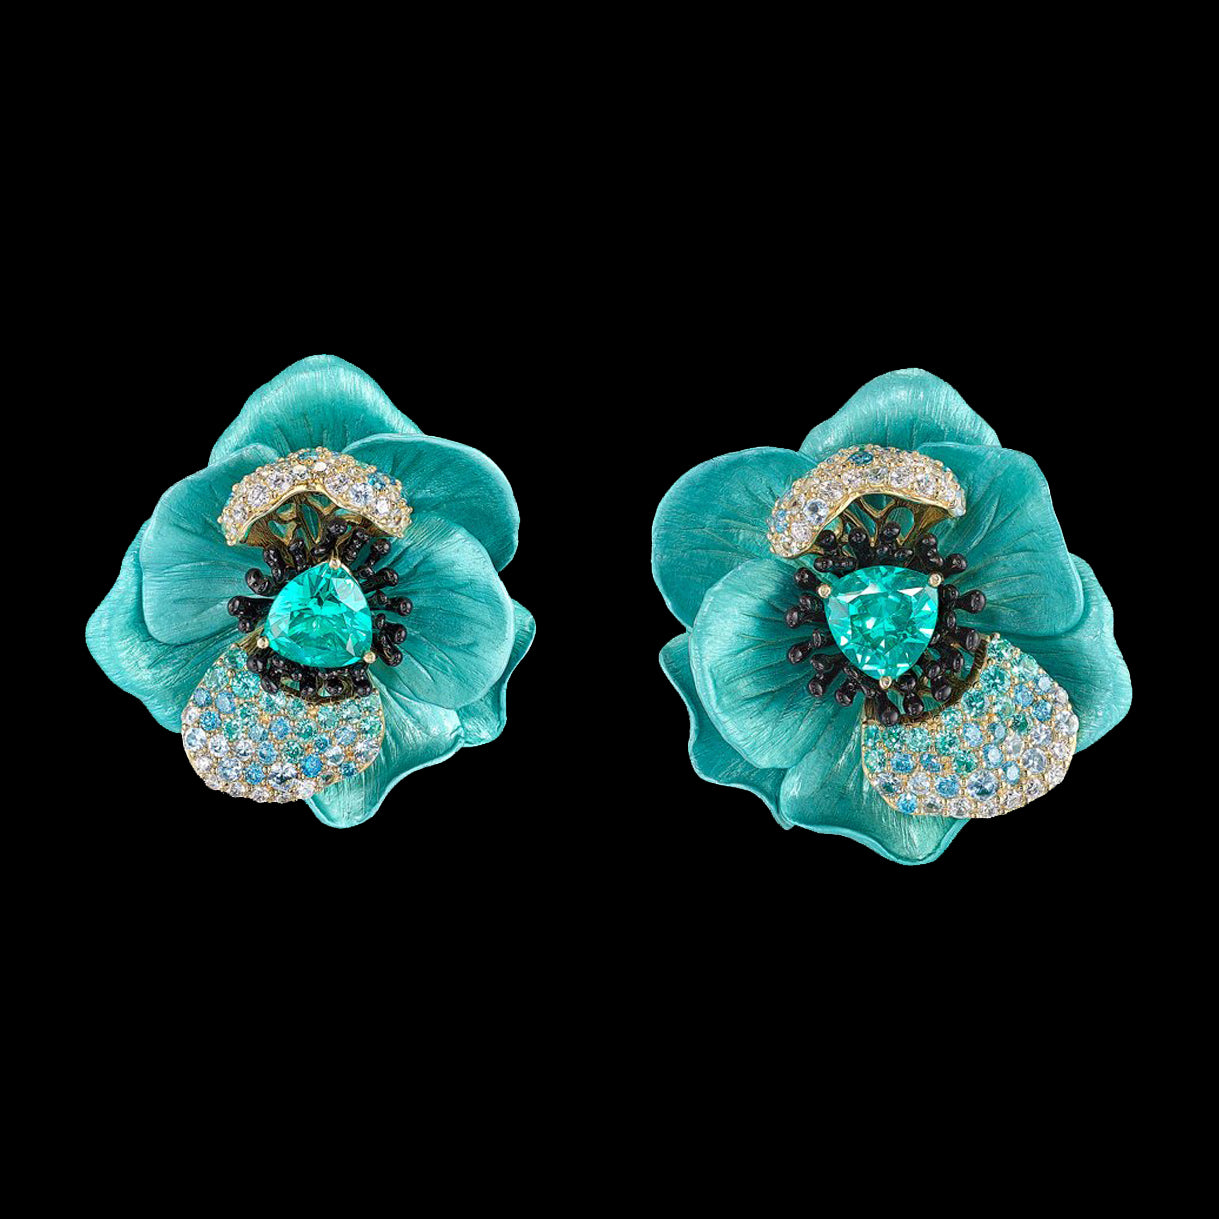 Paraiba Bloom Earrings, Earrings, Anabela Chan Joaillerie - Fine jewelry with laboratory grown and created gemstones hand-crafted in the United Kingdom. Anabela Chan Joaillerie is the first fine jewellery brand in the world to champion laboratory-grown and created gemstones with high jewellery design, artisanal craftsmanship and a focus on ethical and sustainable innovations.